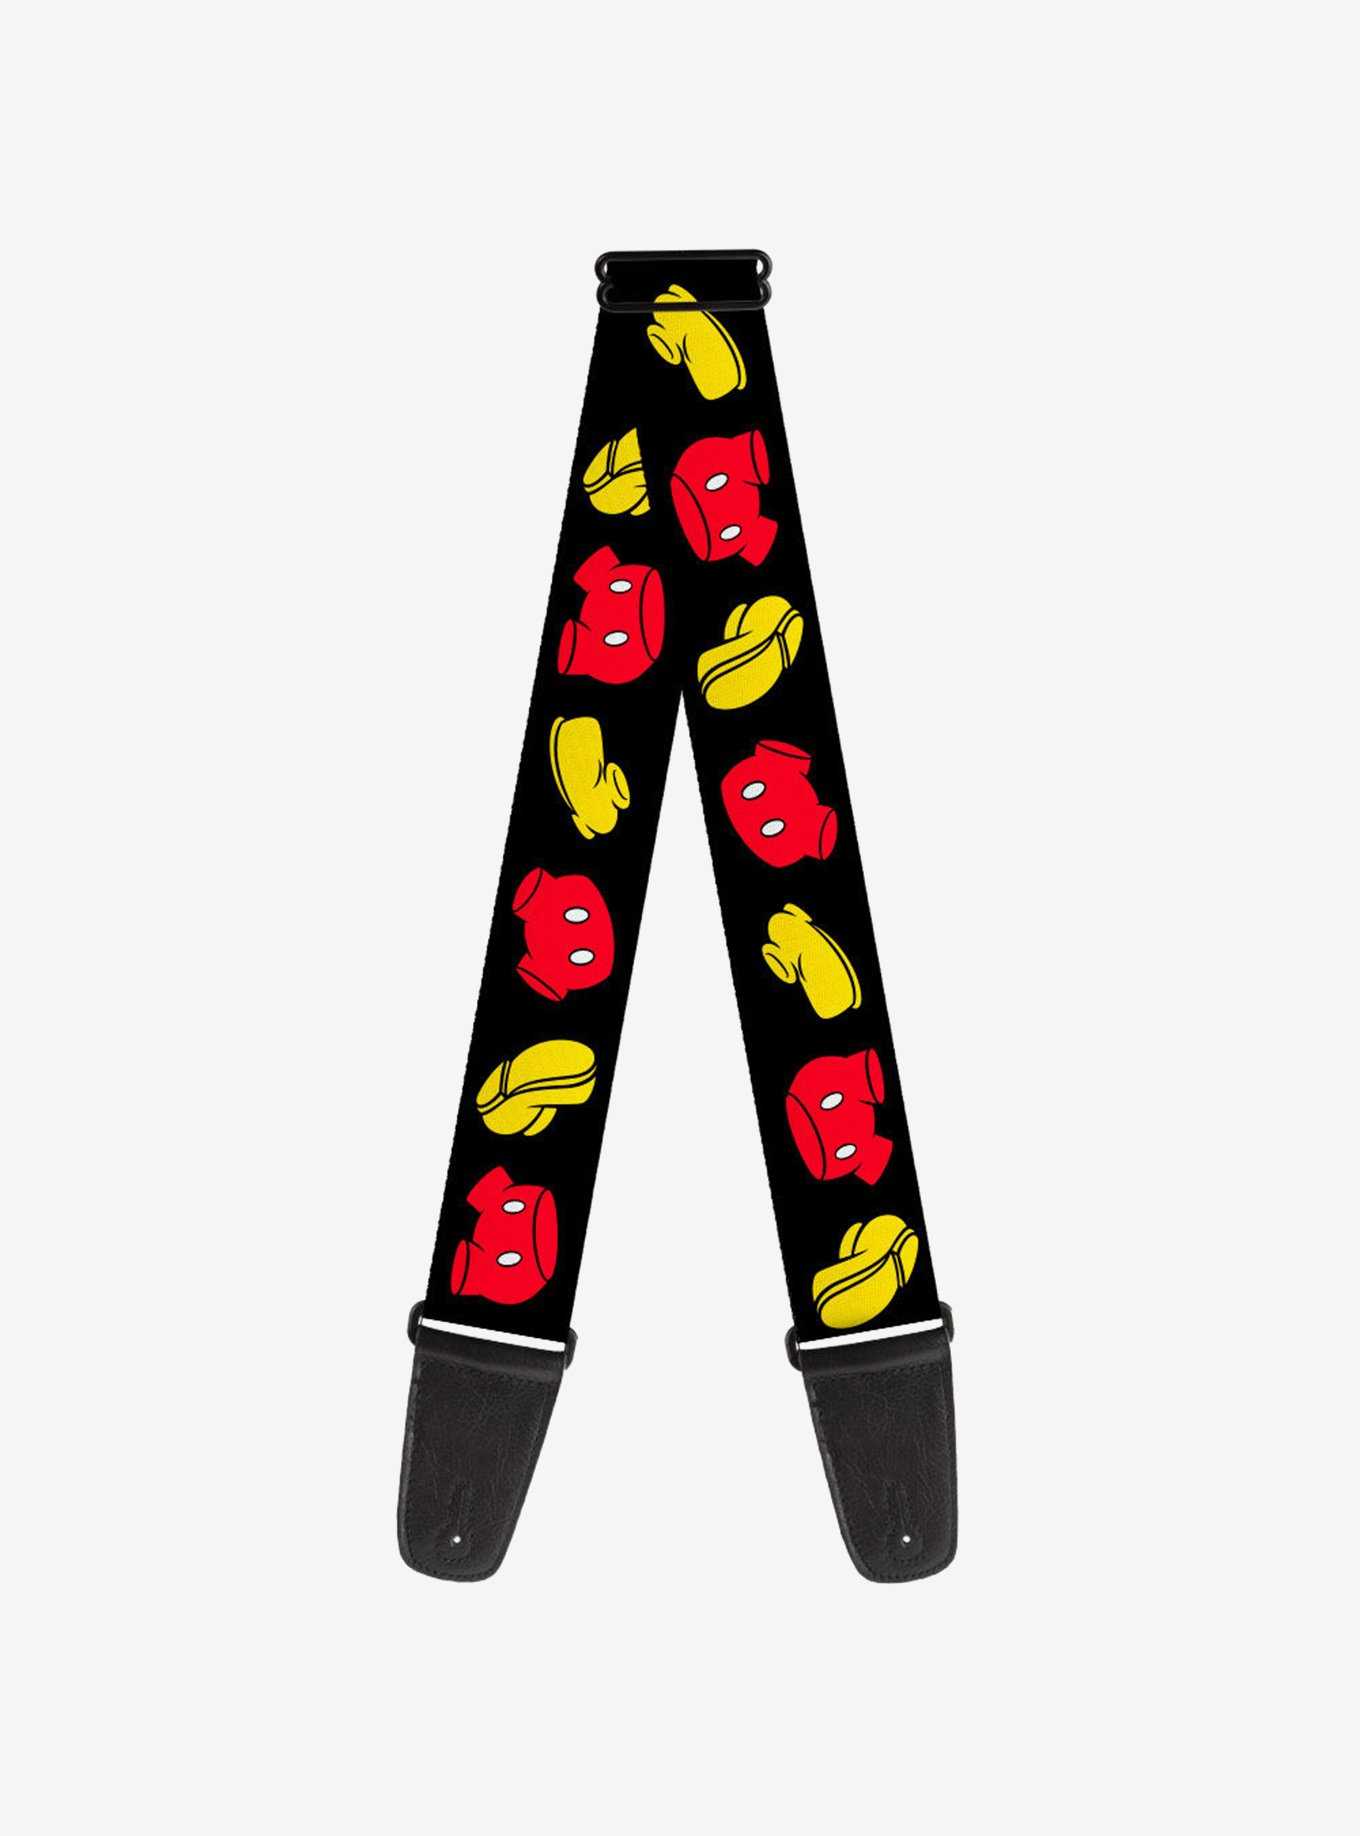 Disney Mickey Mouse Shorts and Shoes Guitar Strap, , hi-res